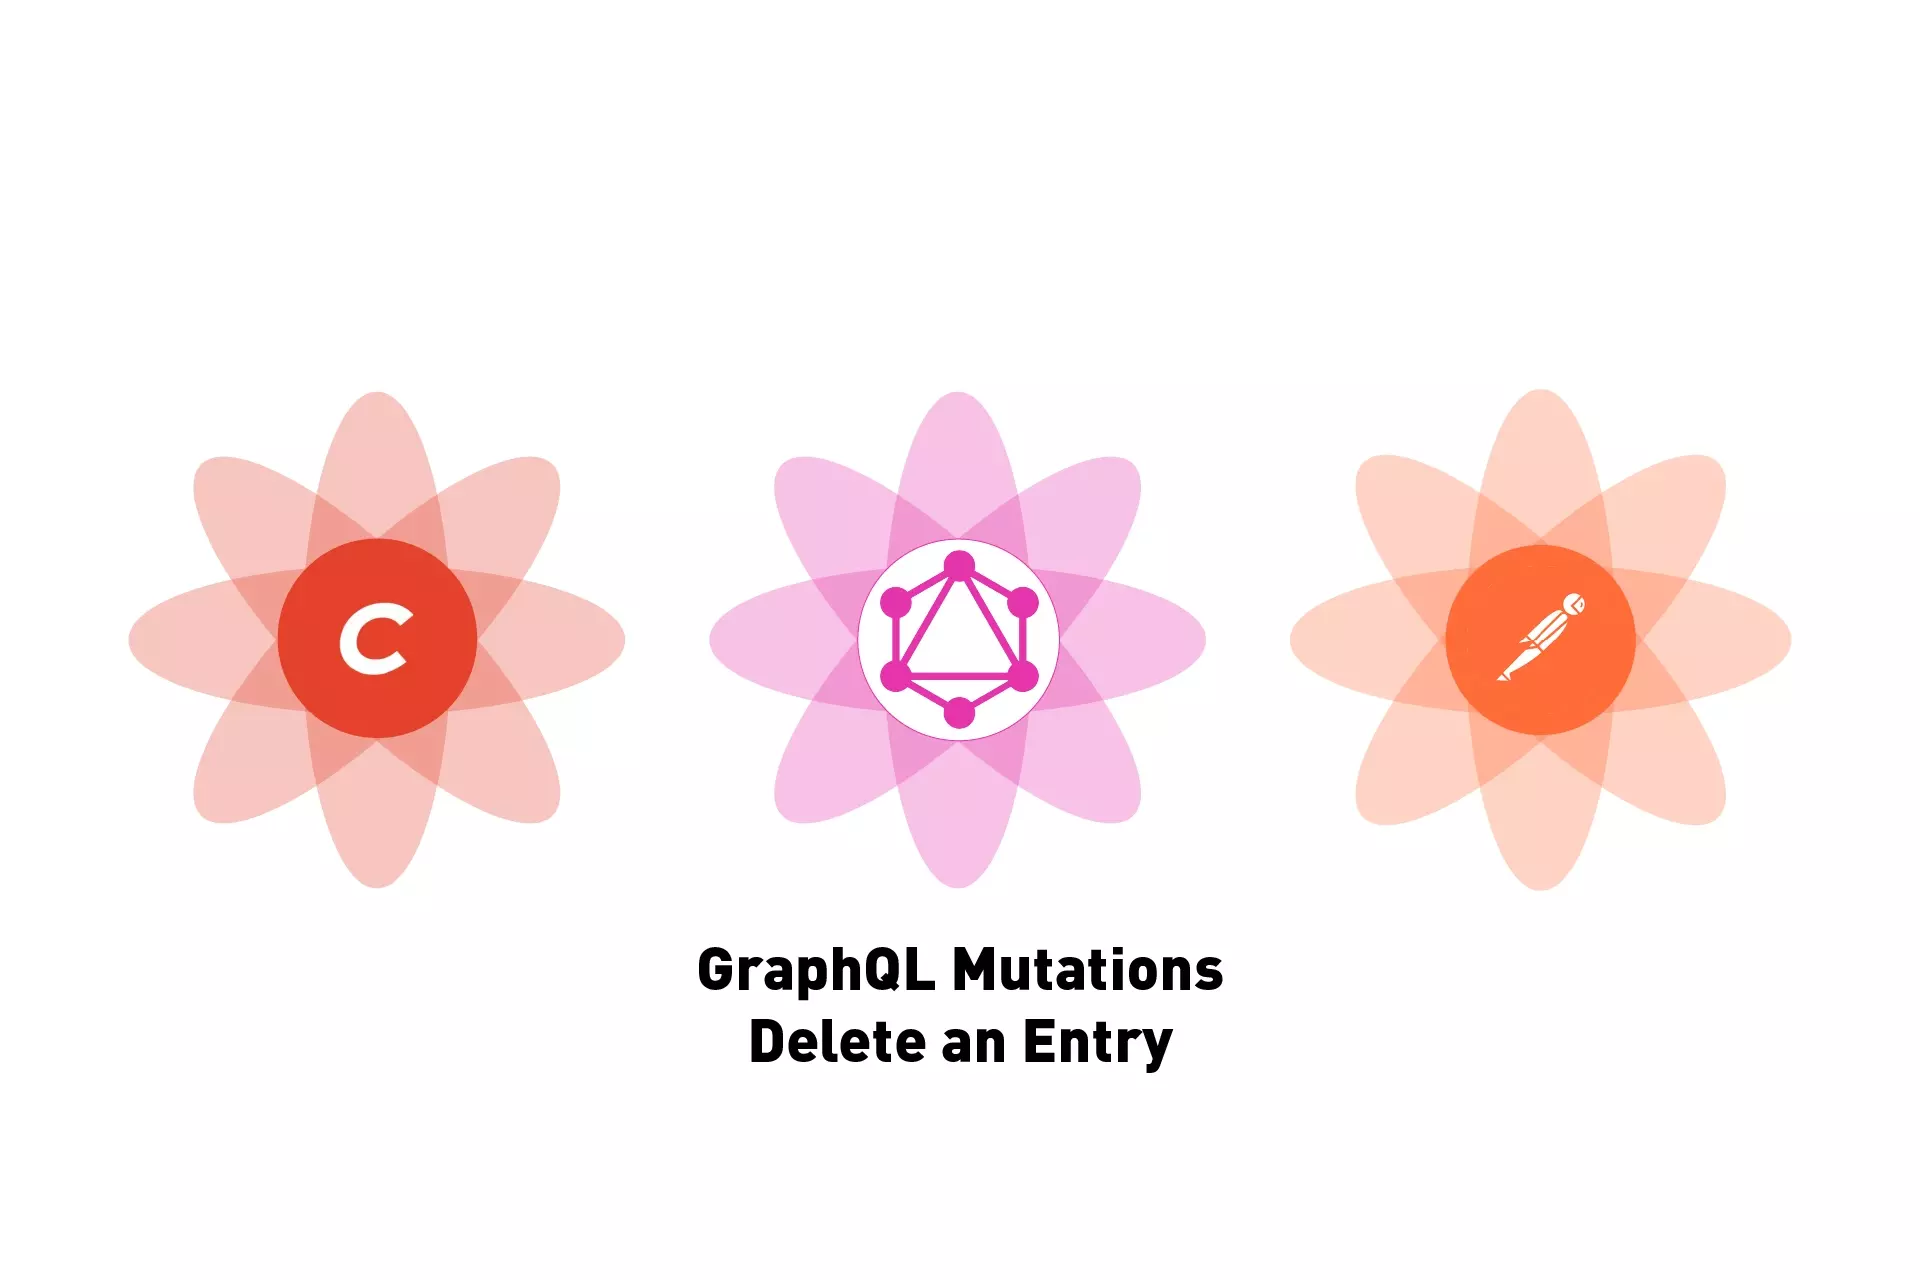 Three flowers that represent Craft CMS, GraphQL & Postman side by side. Beneath them sits the text "GraphQL Mutations Delete an Entry."